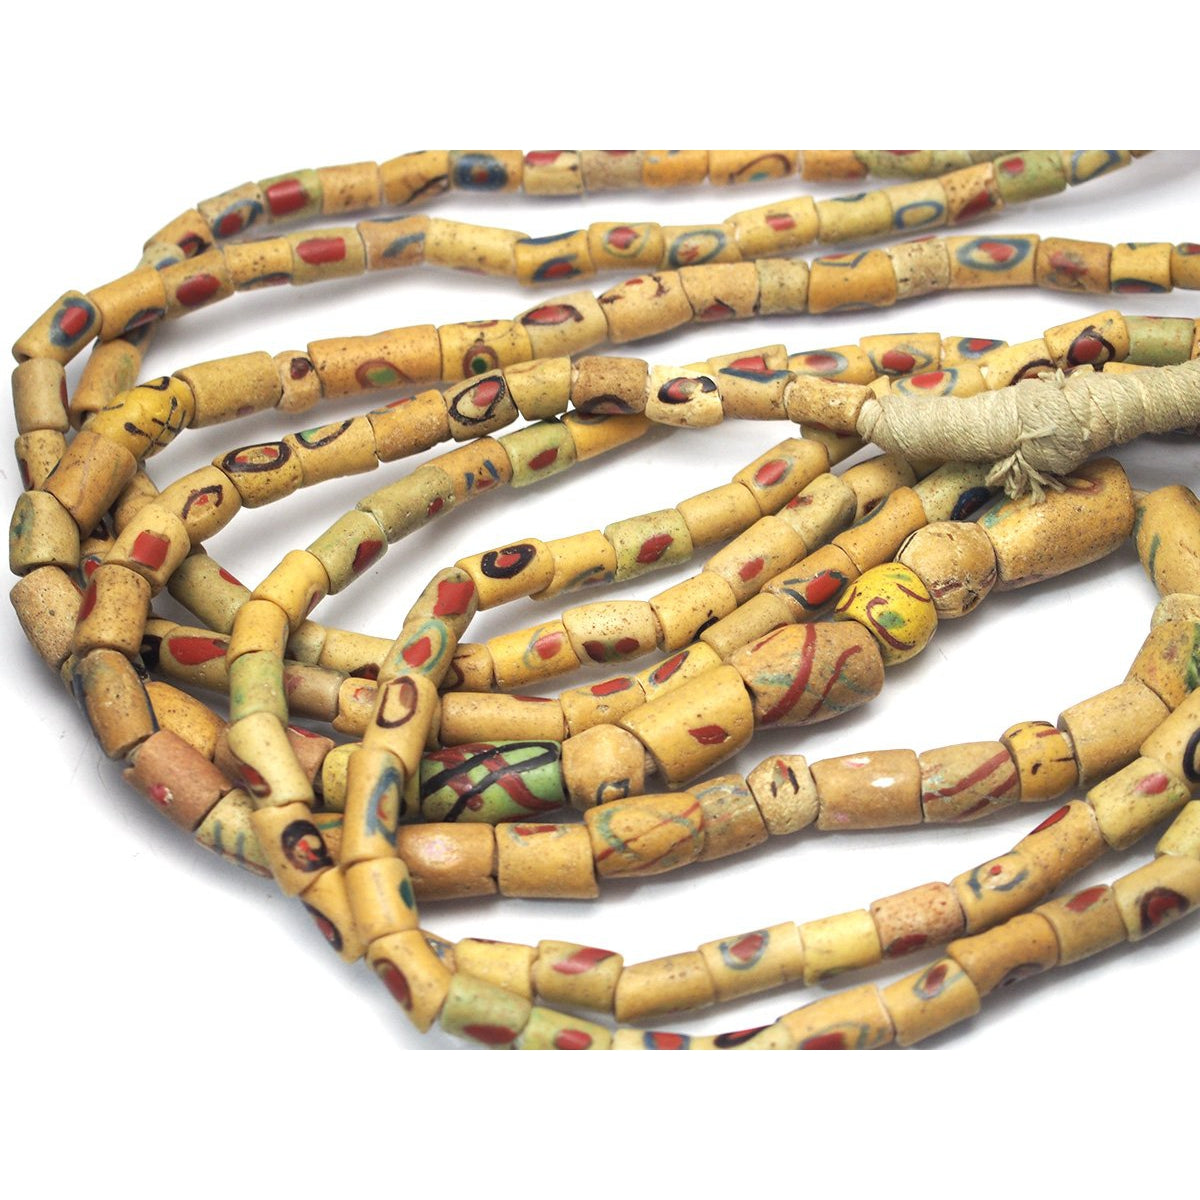 Venetian Glass Beads May Be Oldest European Artifacts Found in